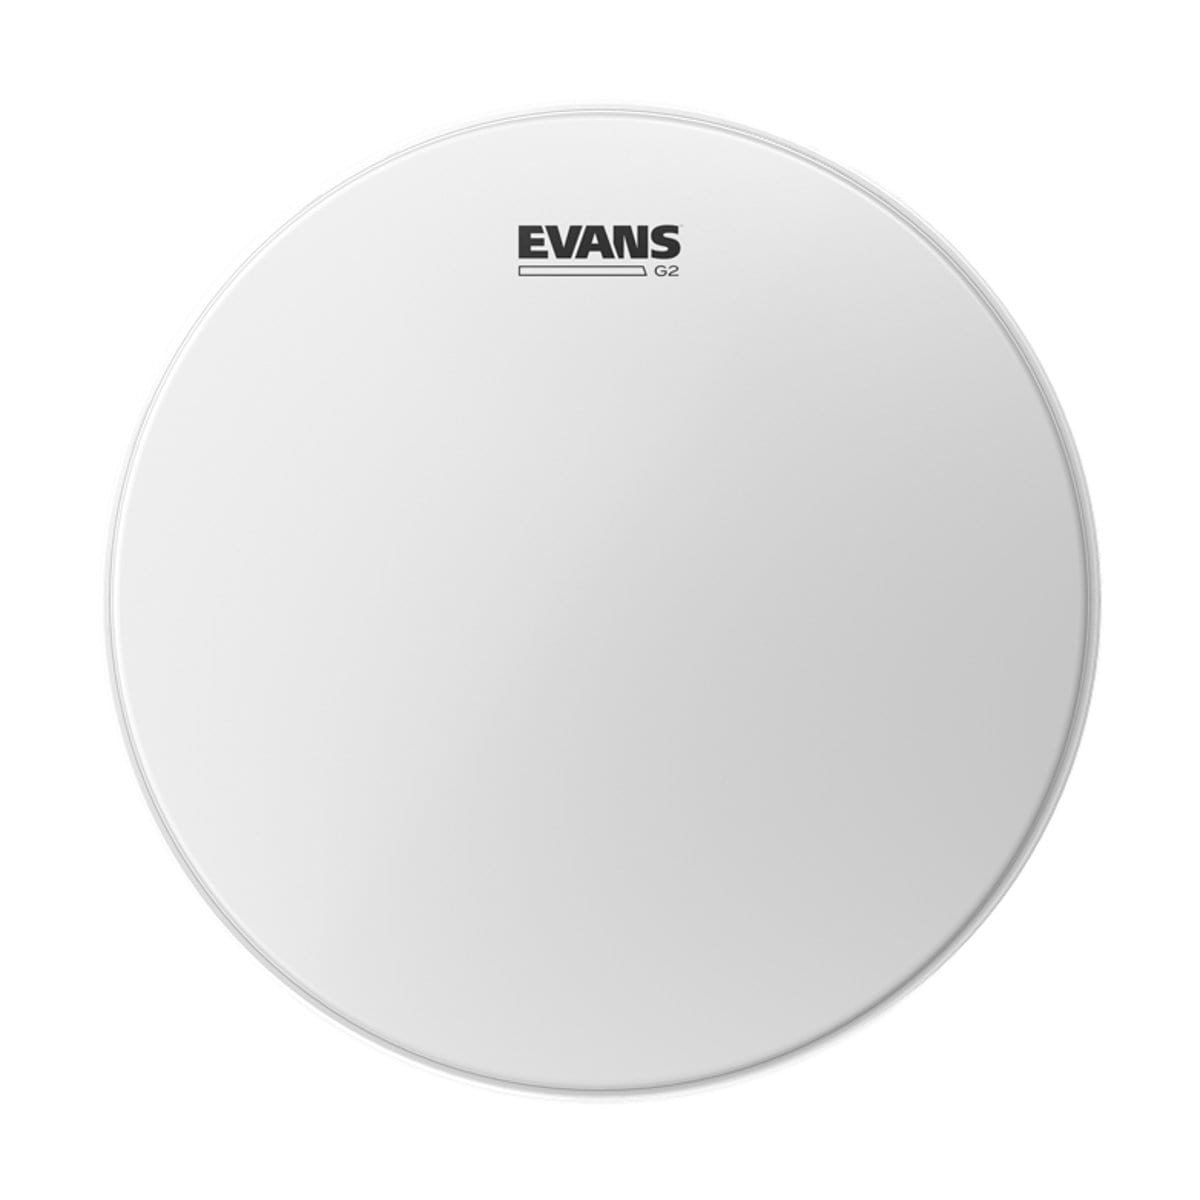 Evans Percussion Evans 10 Inch Drum Head G2 Coated B10G2 - Byron Music